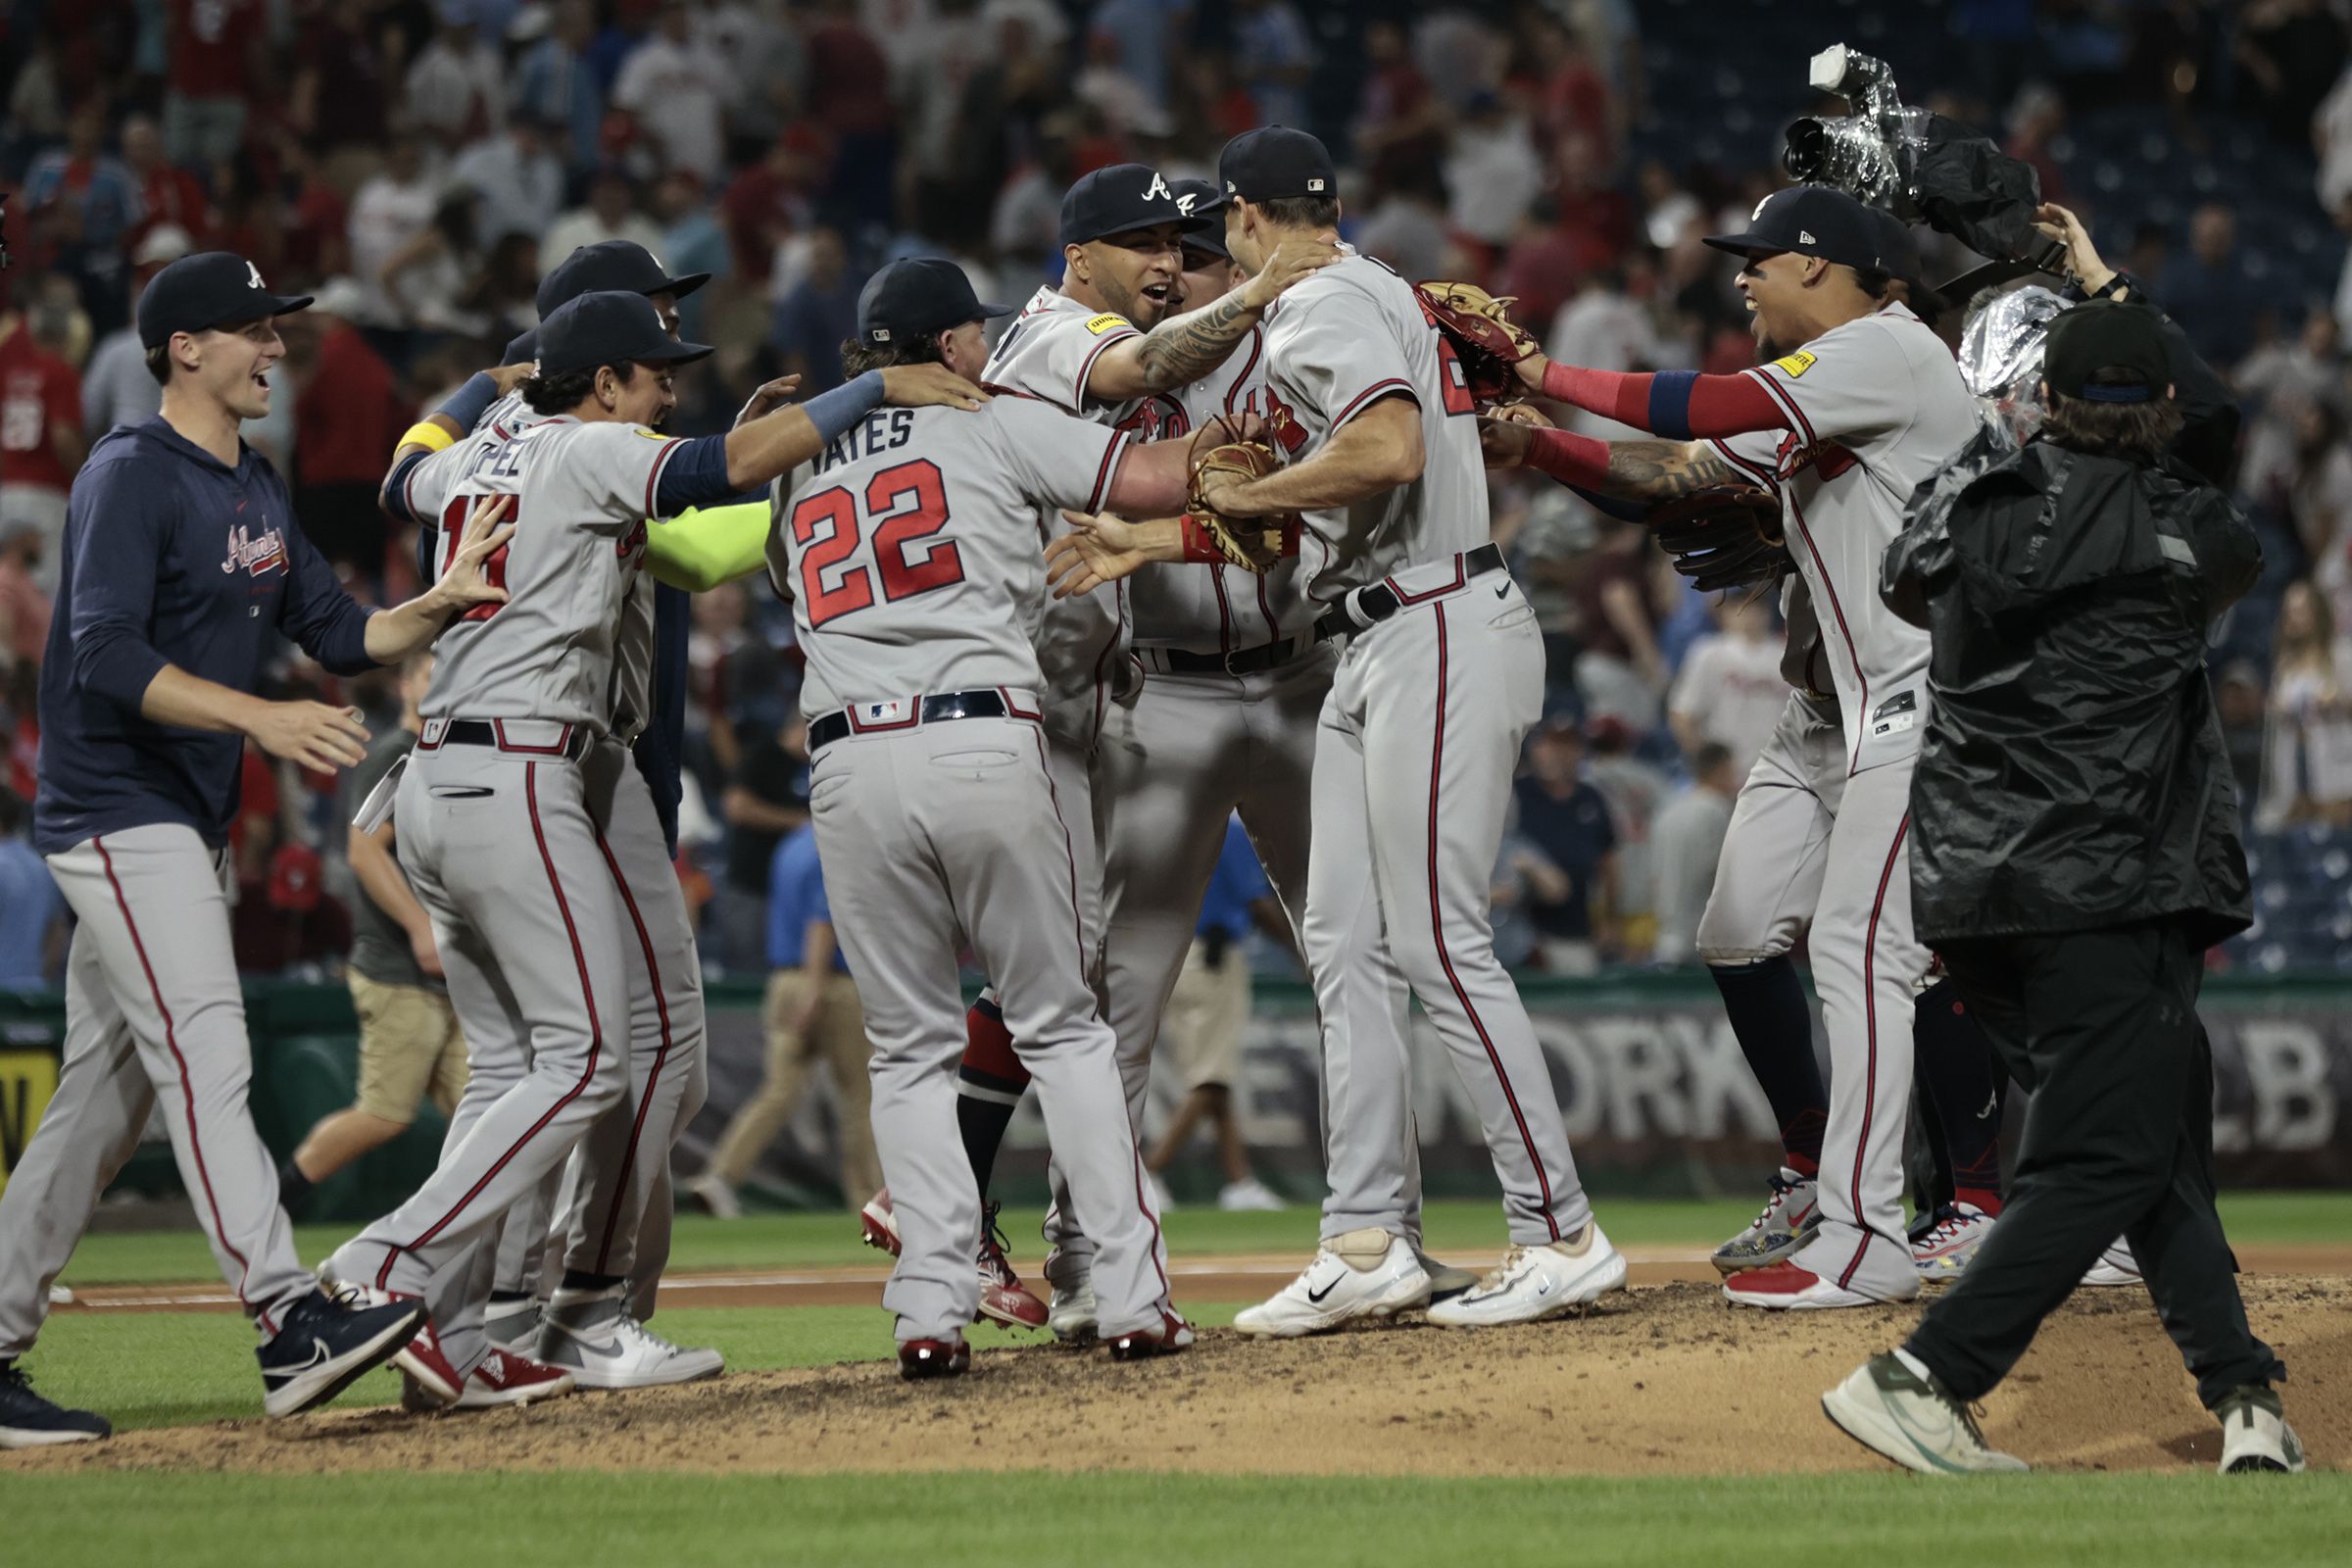 Braves drop fourth straight despite good offensive outing